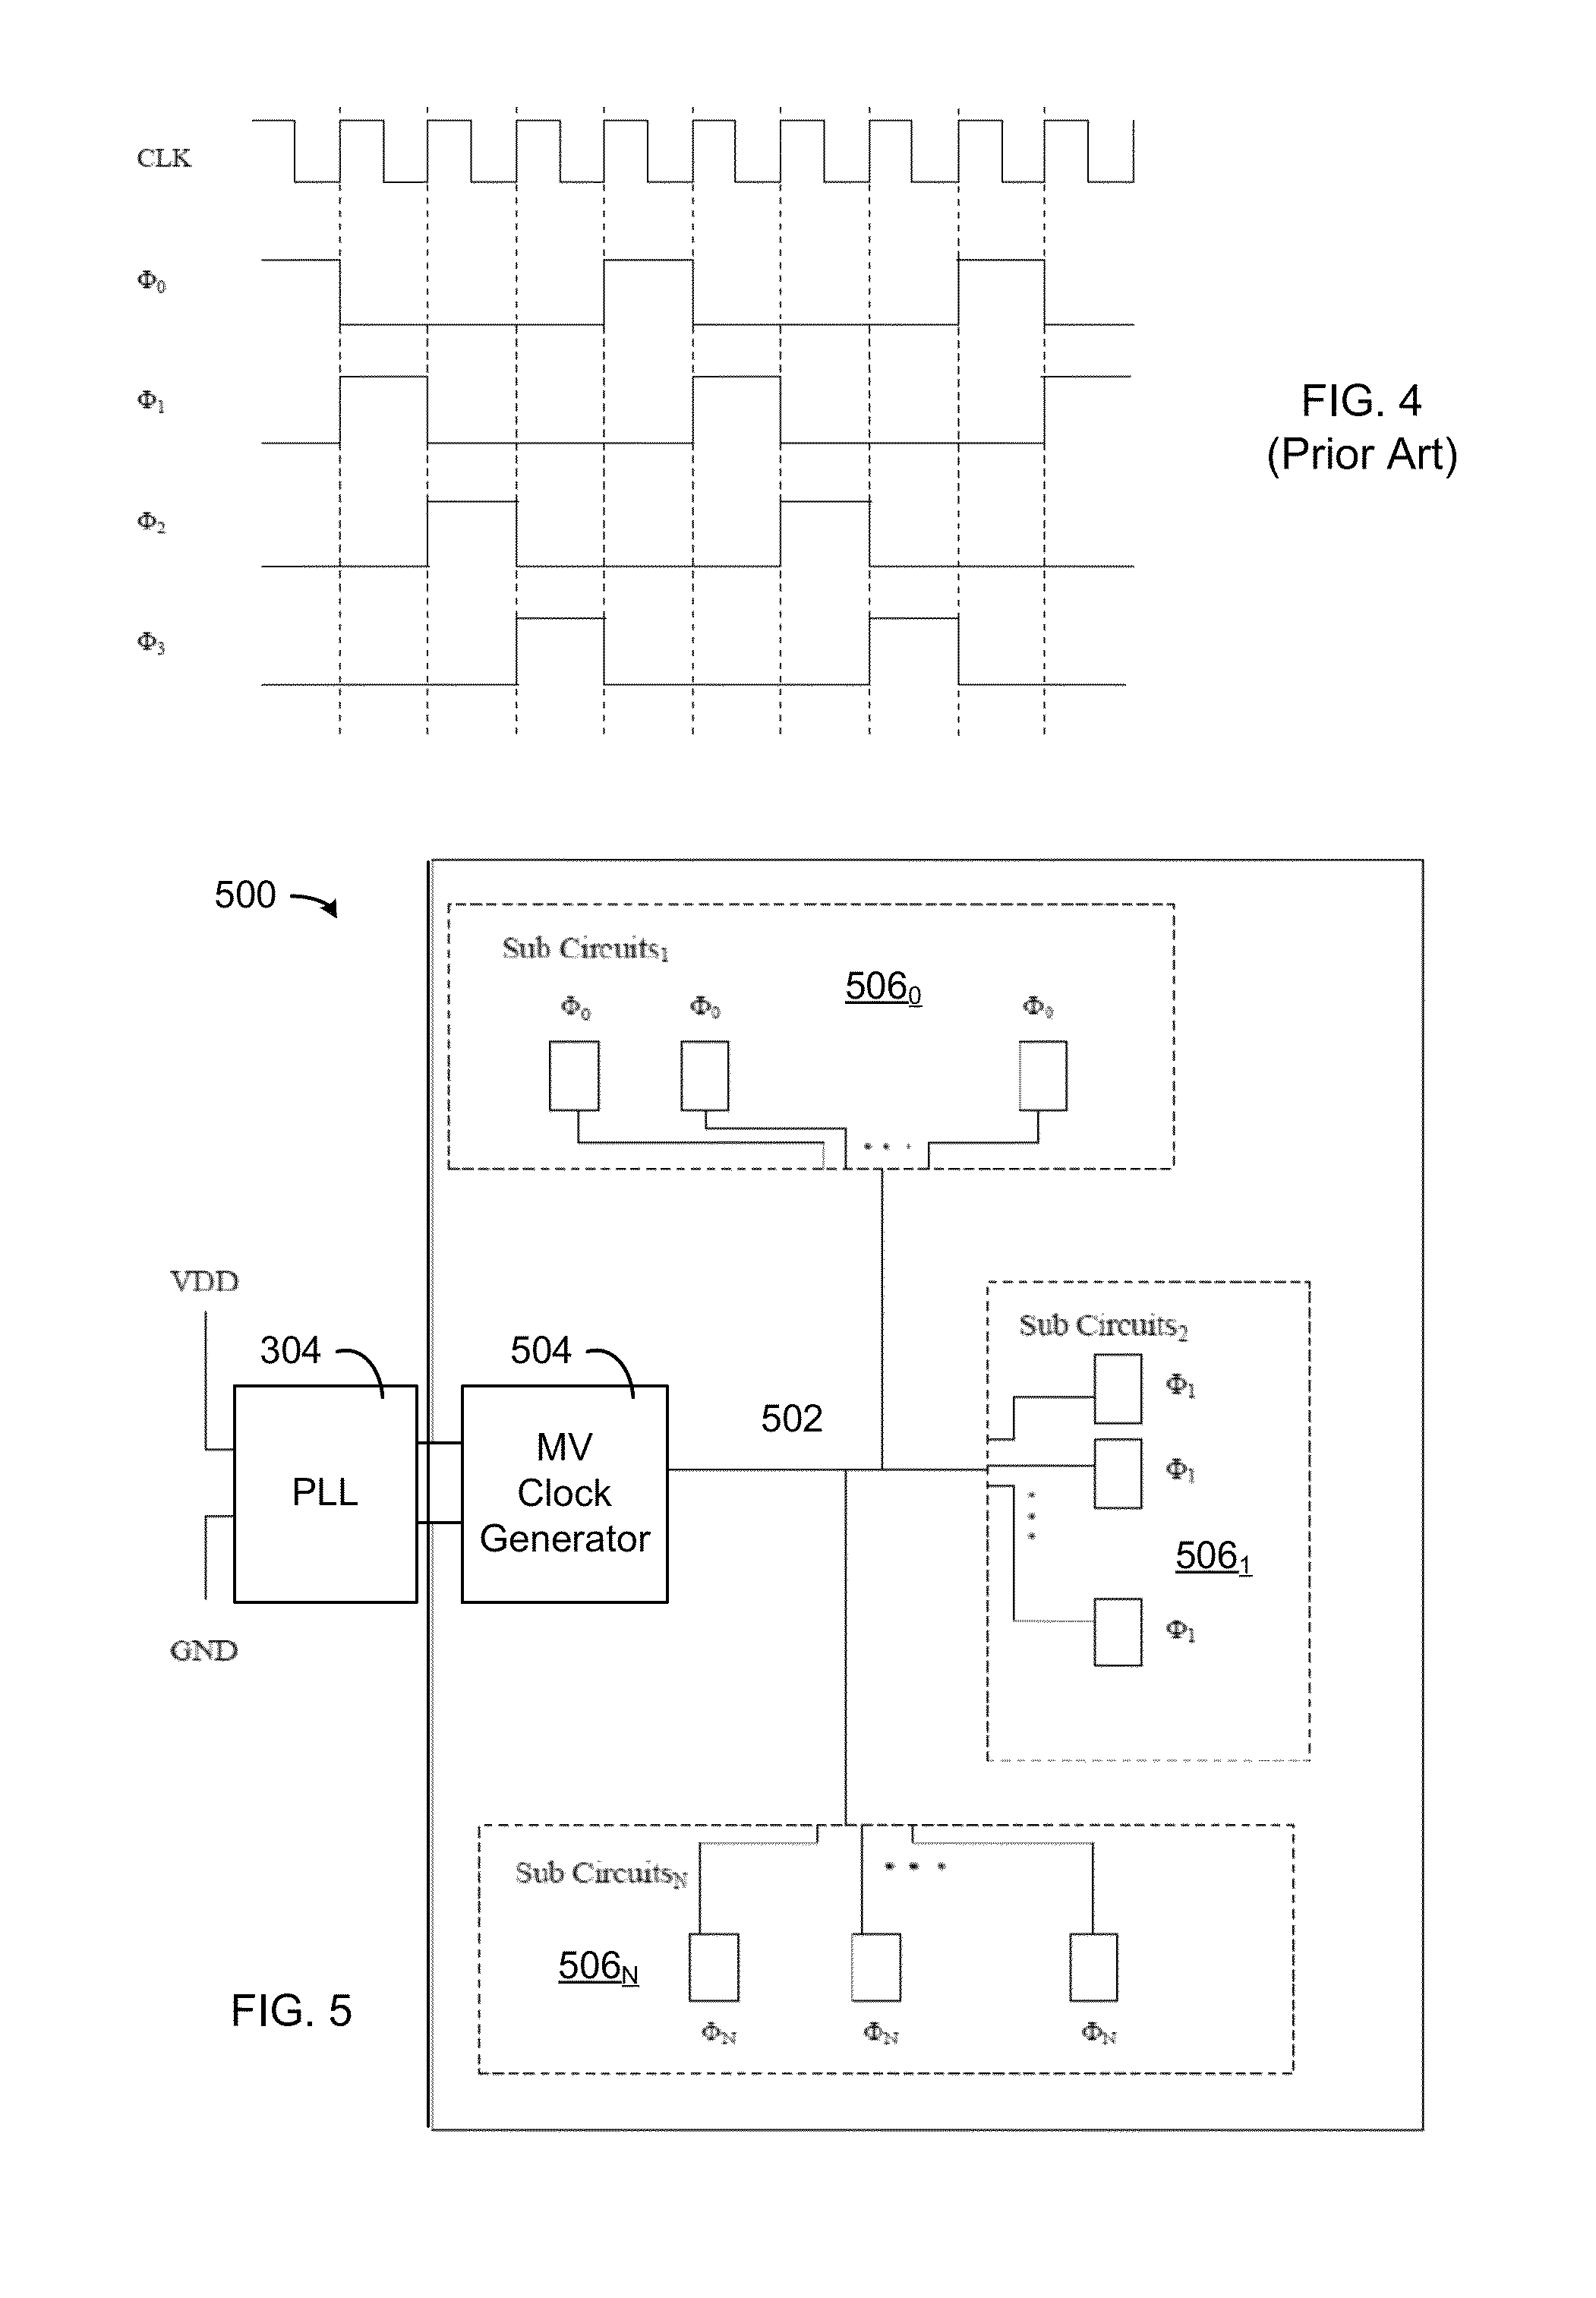 Single clock distribution network for multi-phase clock integrated circuits